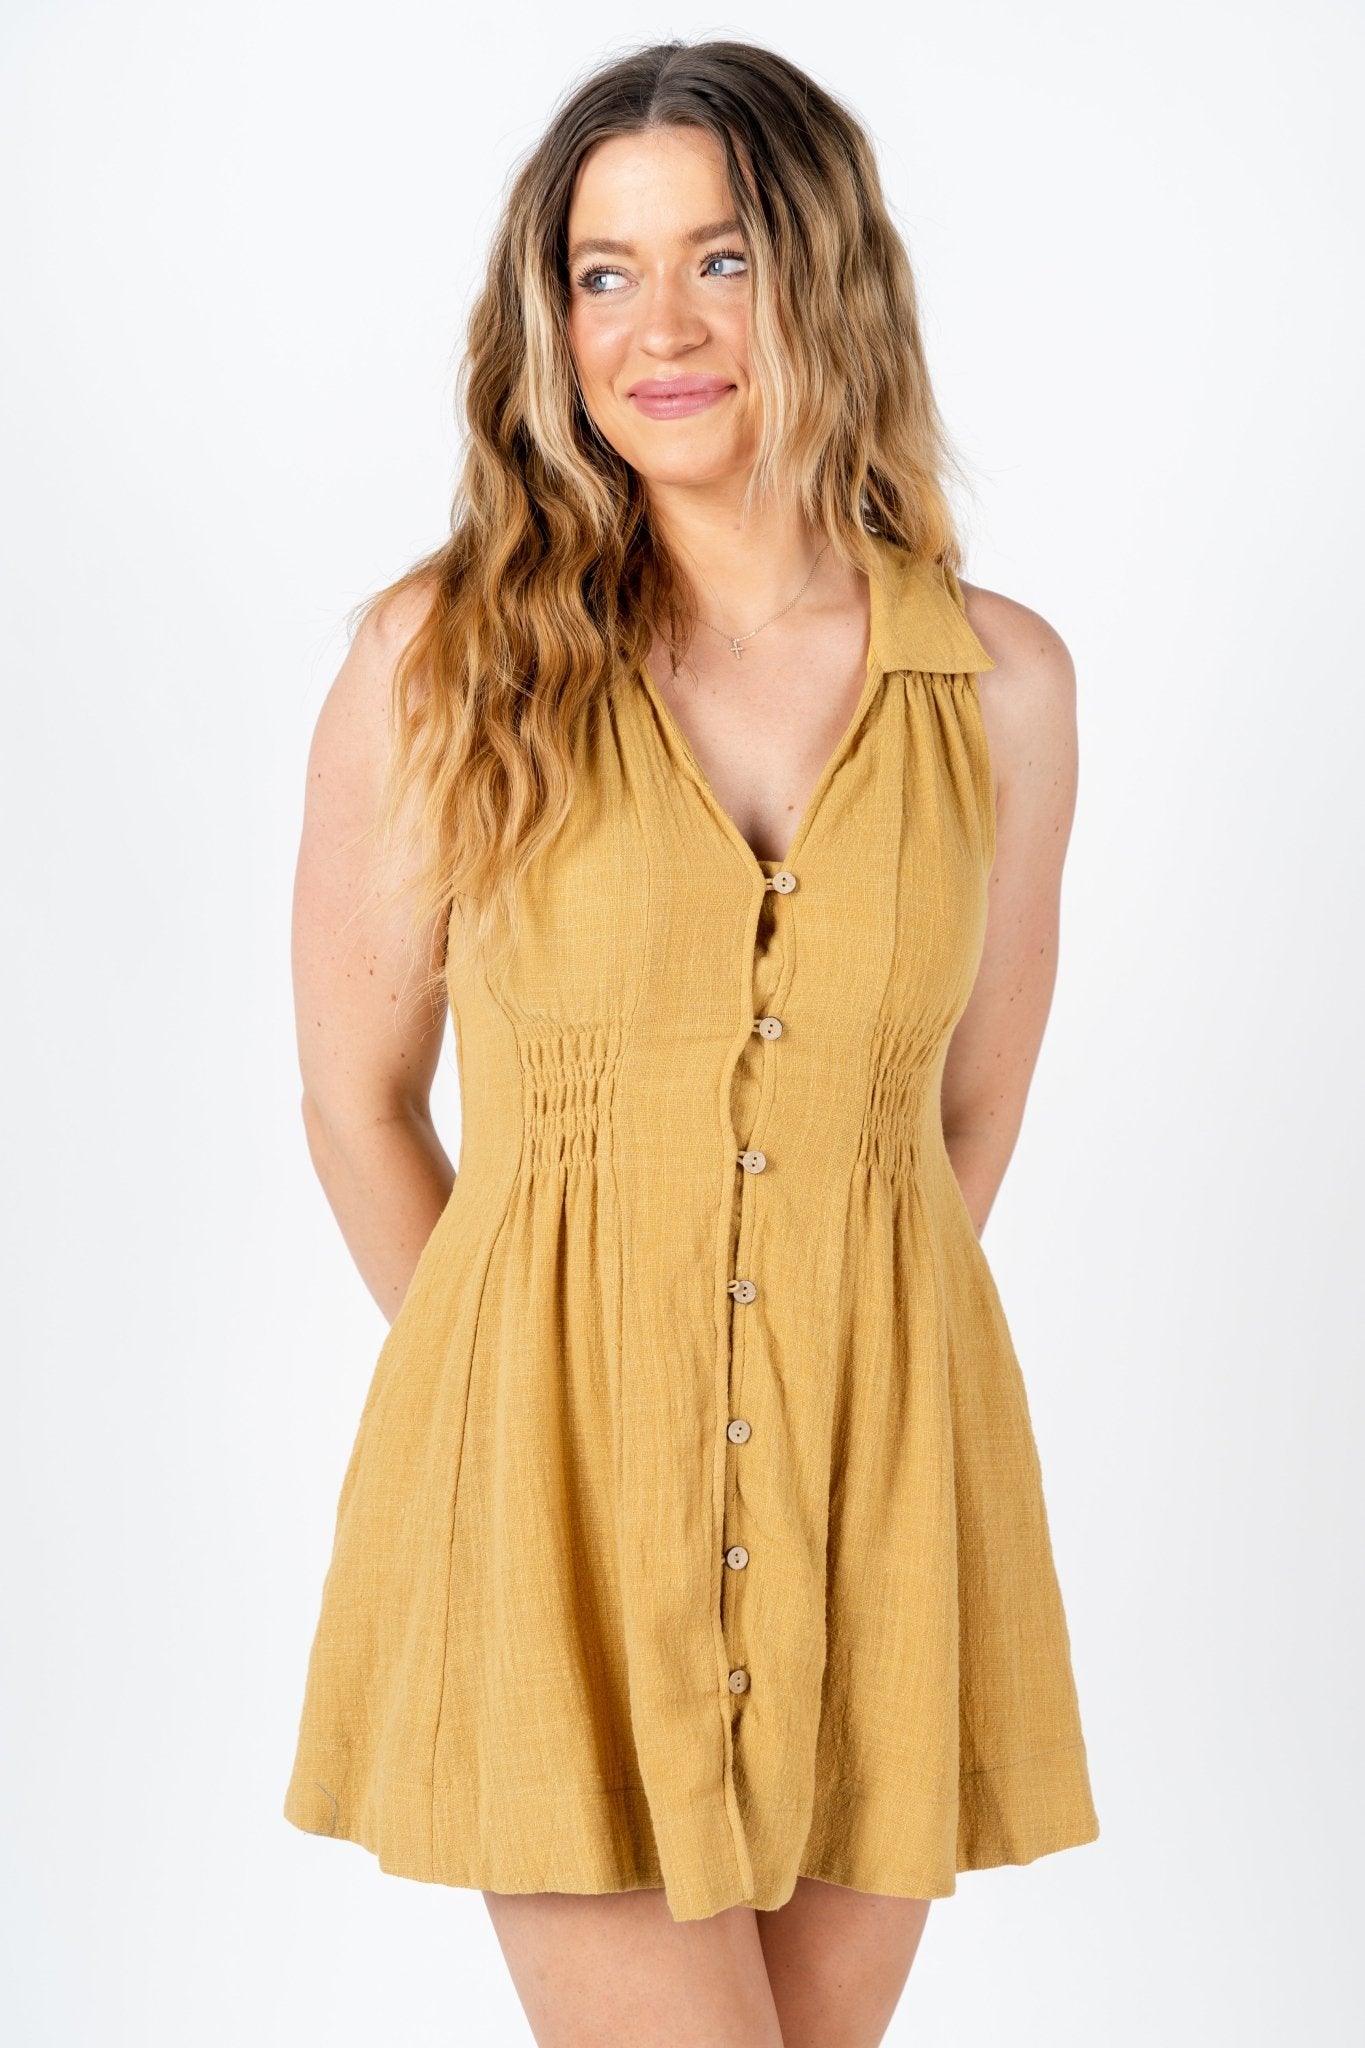 Smocked collared dress golden kiwi - Affordable Dress - Boutique Dresses at Lush Fashion Lounge Boutique in Oklahoma City